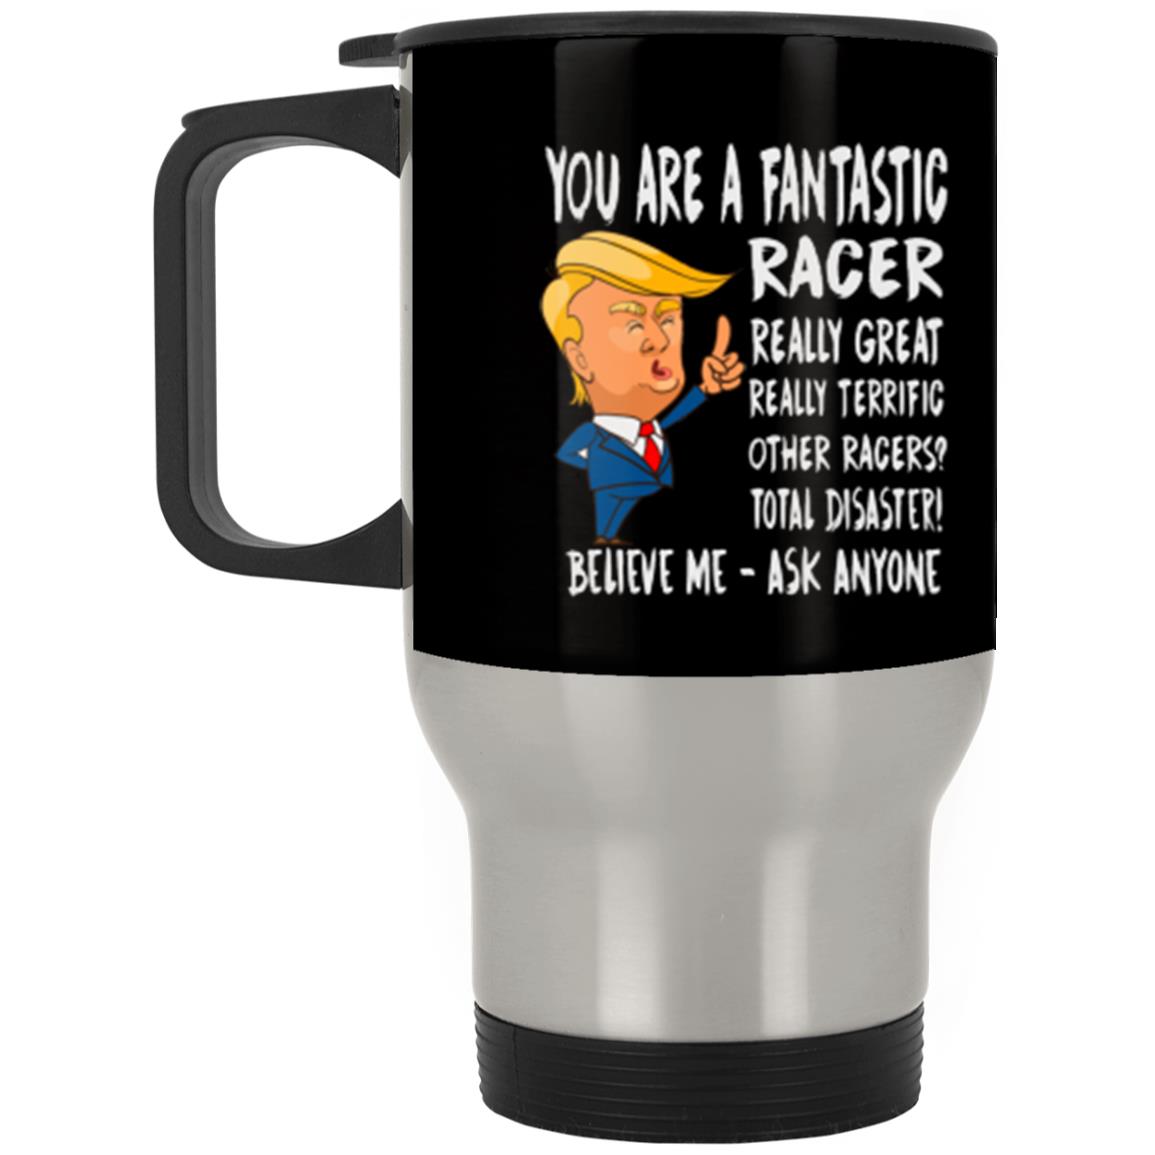 YOU ARE A FANTASTIC RACER TRAVEL TUMBLER